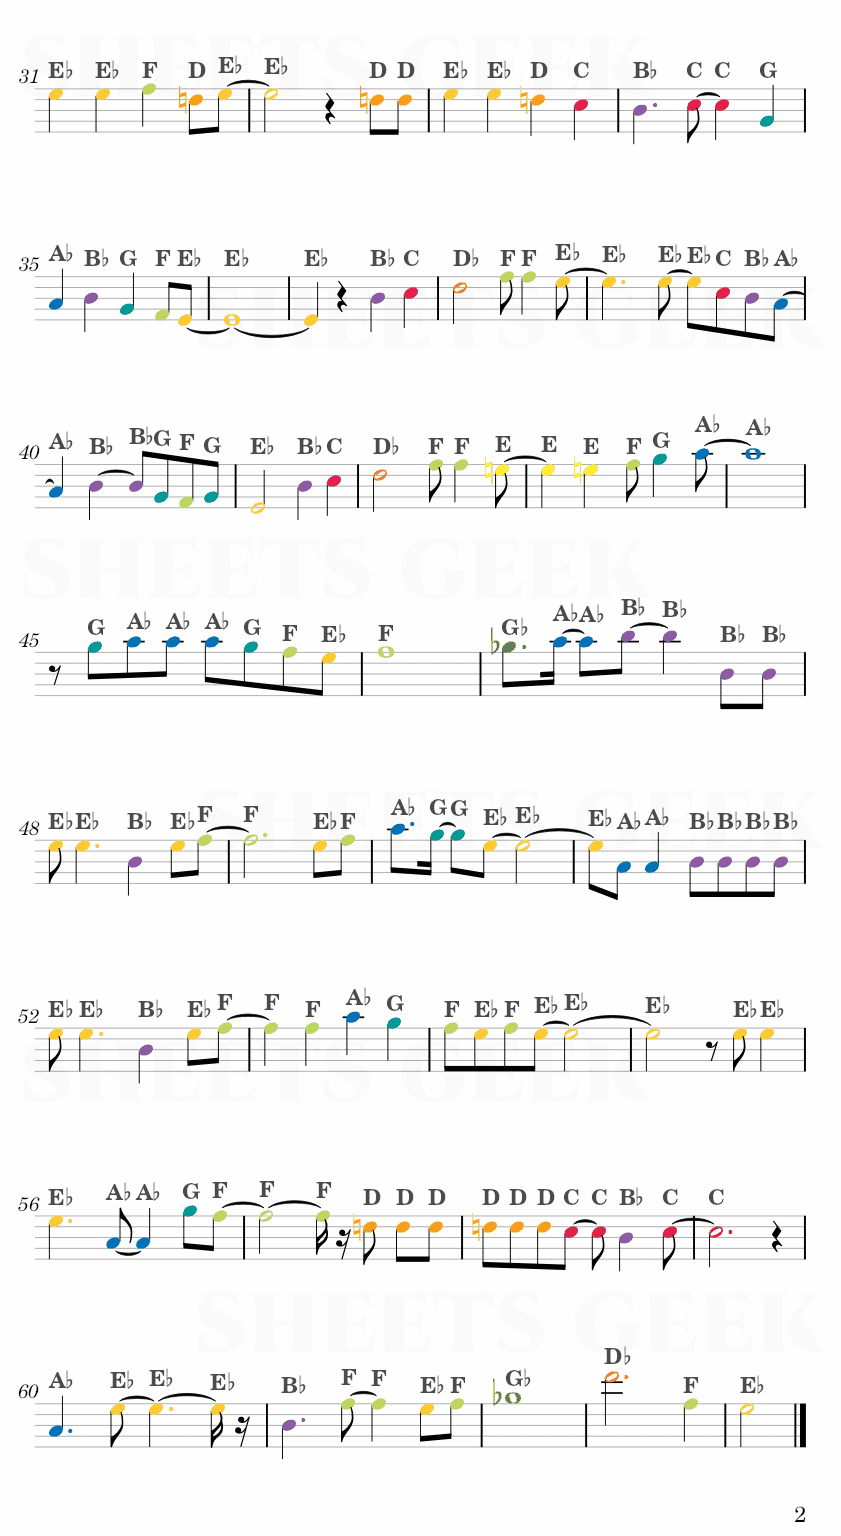 One Piece - Opening 1 Easy Sheet Music Free for piano, keyboard, flute, violin, sax, cello page 2